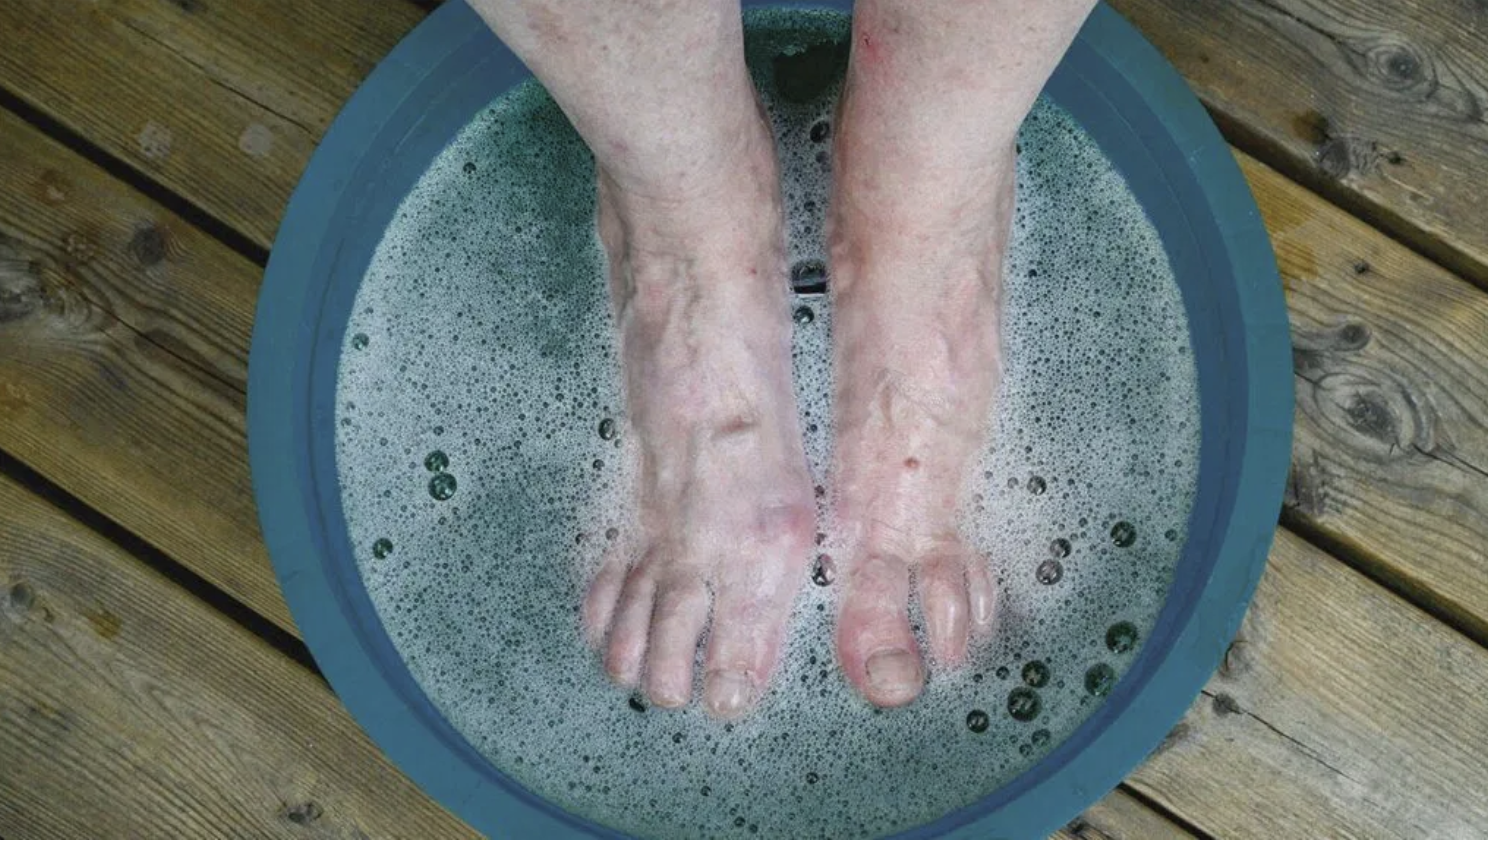 Contrast baths can be very effective for helping relieve hallux limitus pain. 